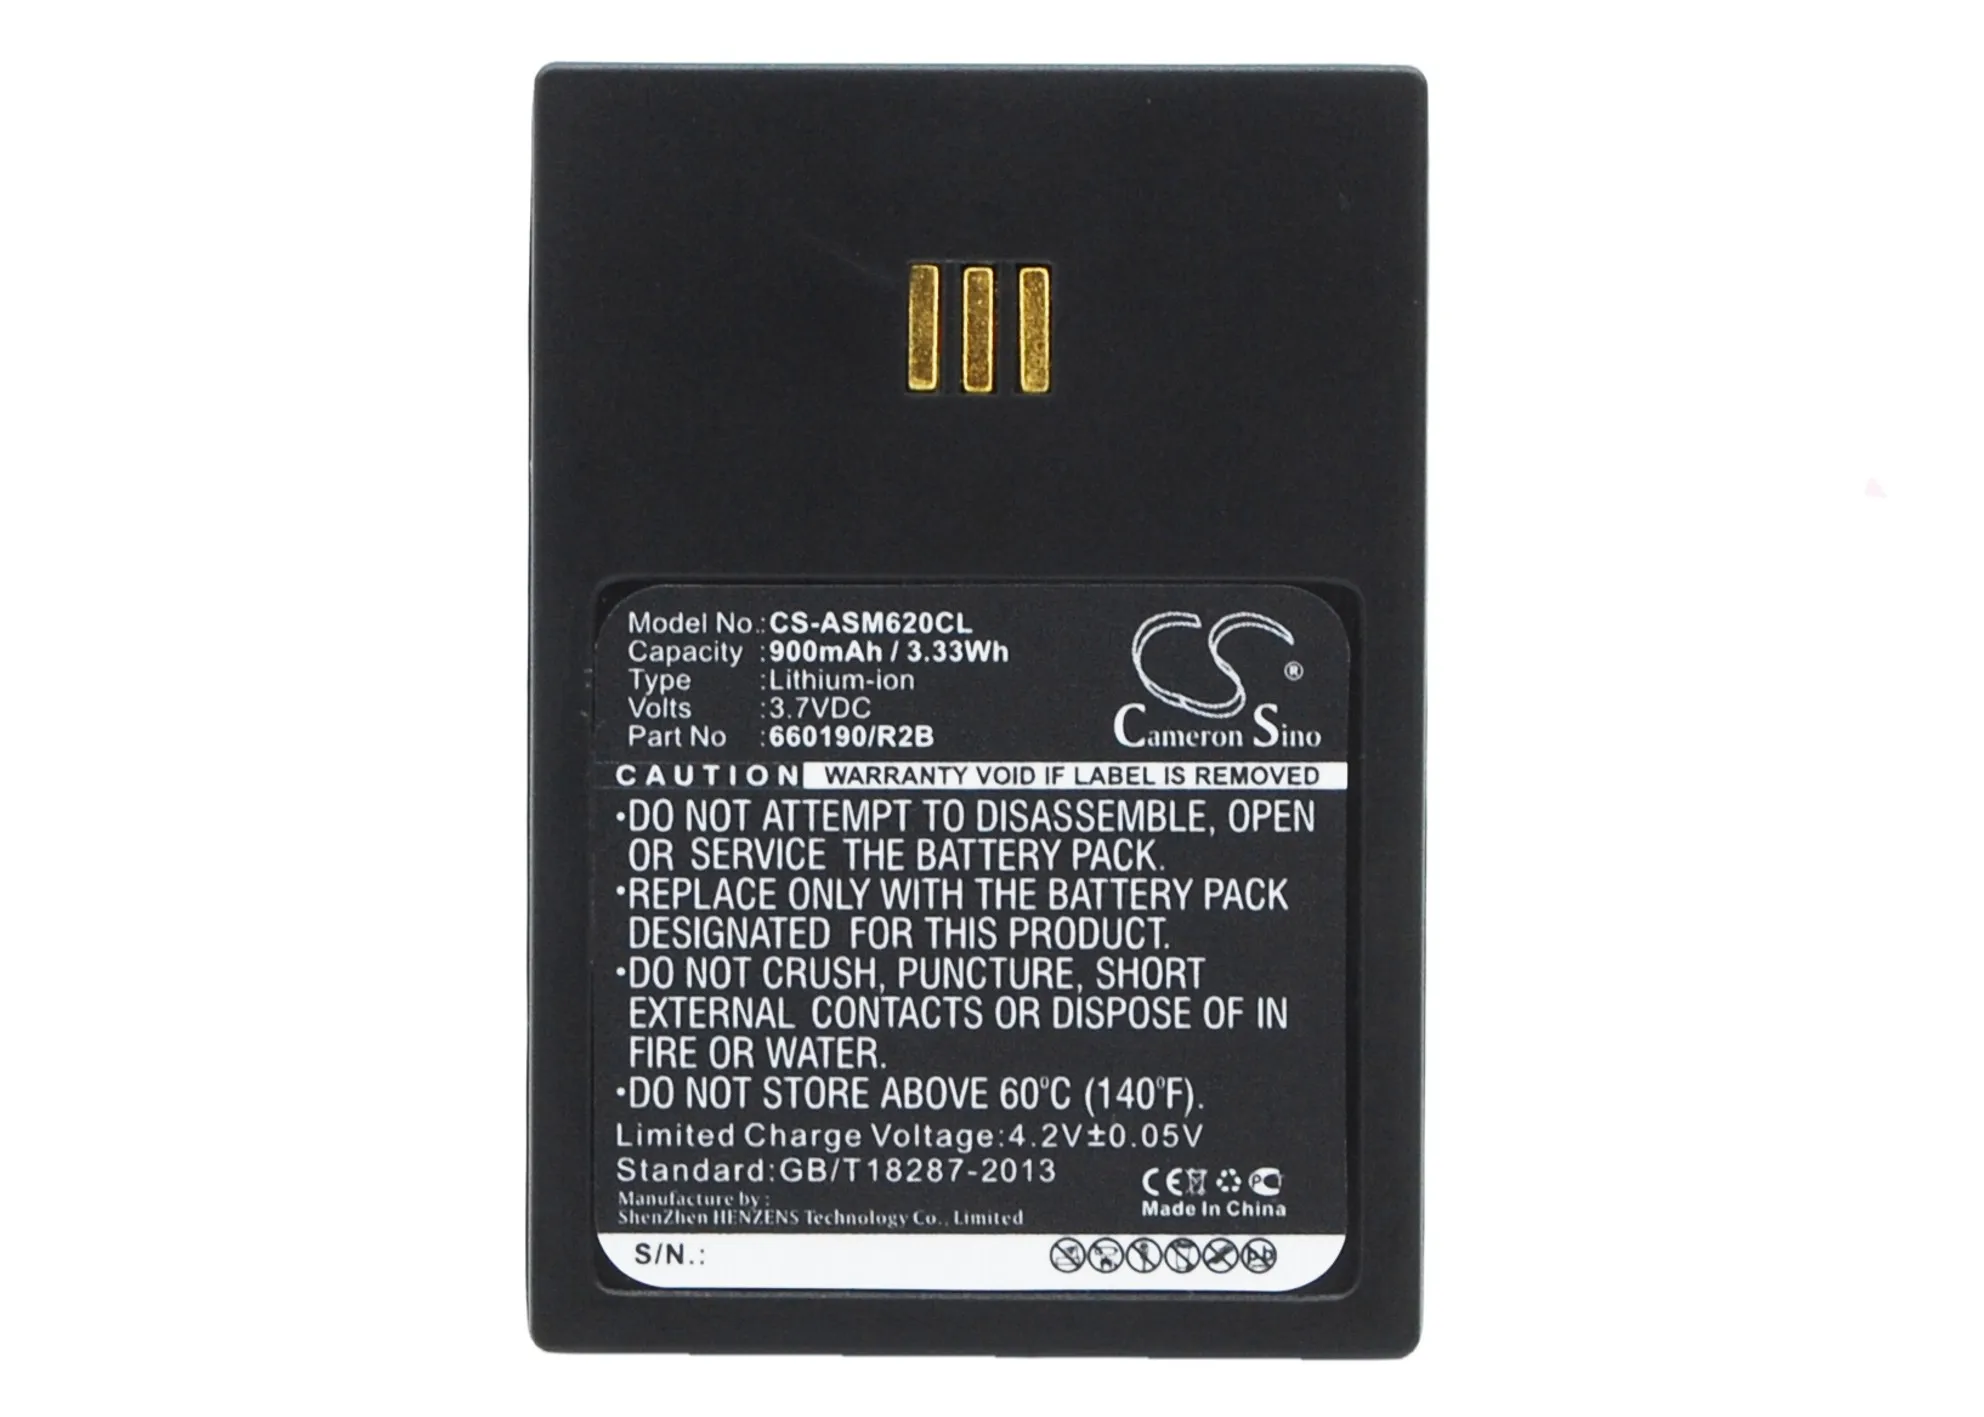 

Cameron Sino 900mAh Battery for Aastra DH4-BAAA/2B, DT690, DT692, for Ascom 9D62, D62, i62 Messenger, i62 Protector, i62 Talker